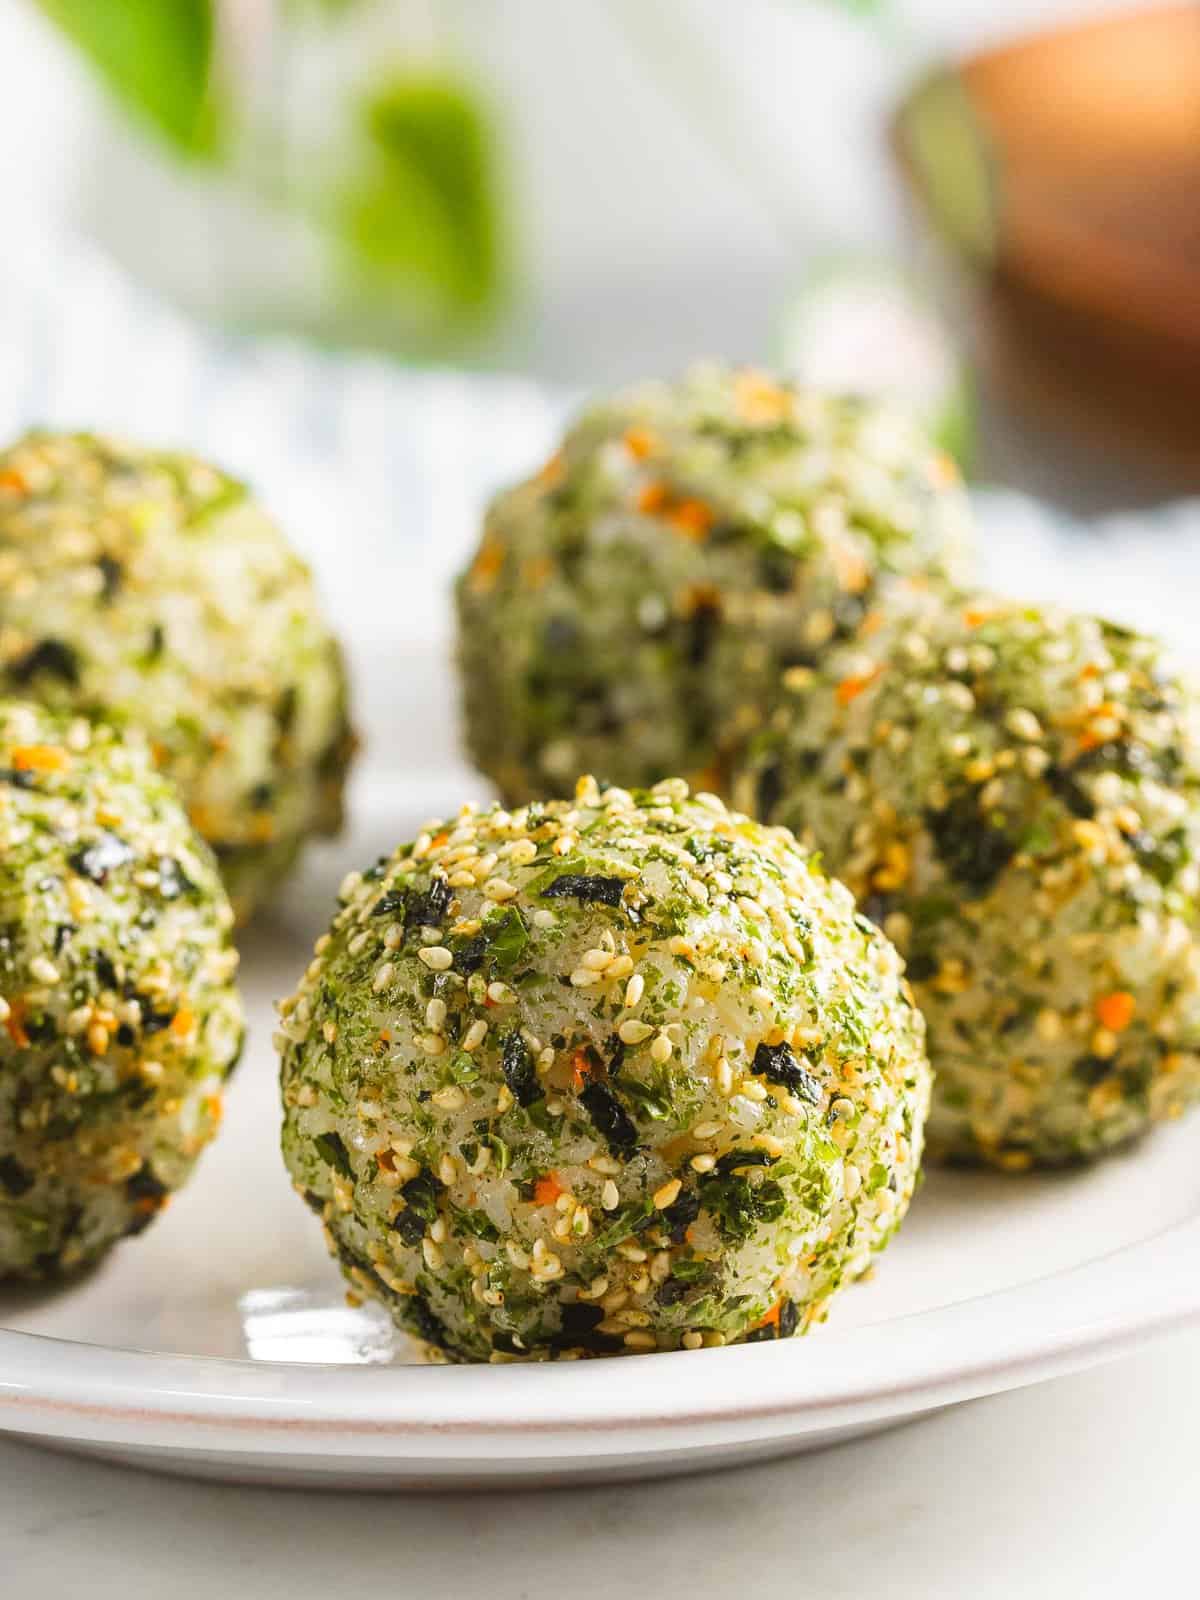 Korean rice balls covered with seaweed and sesame seeds.